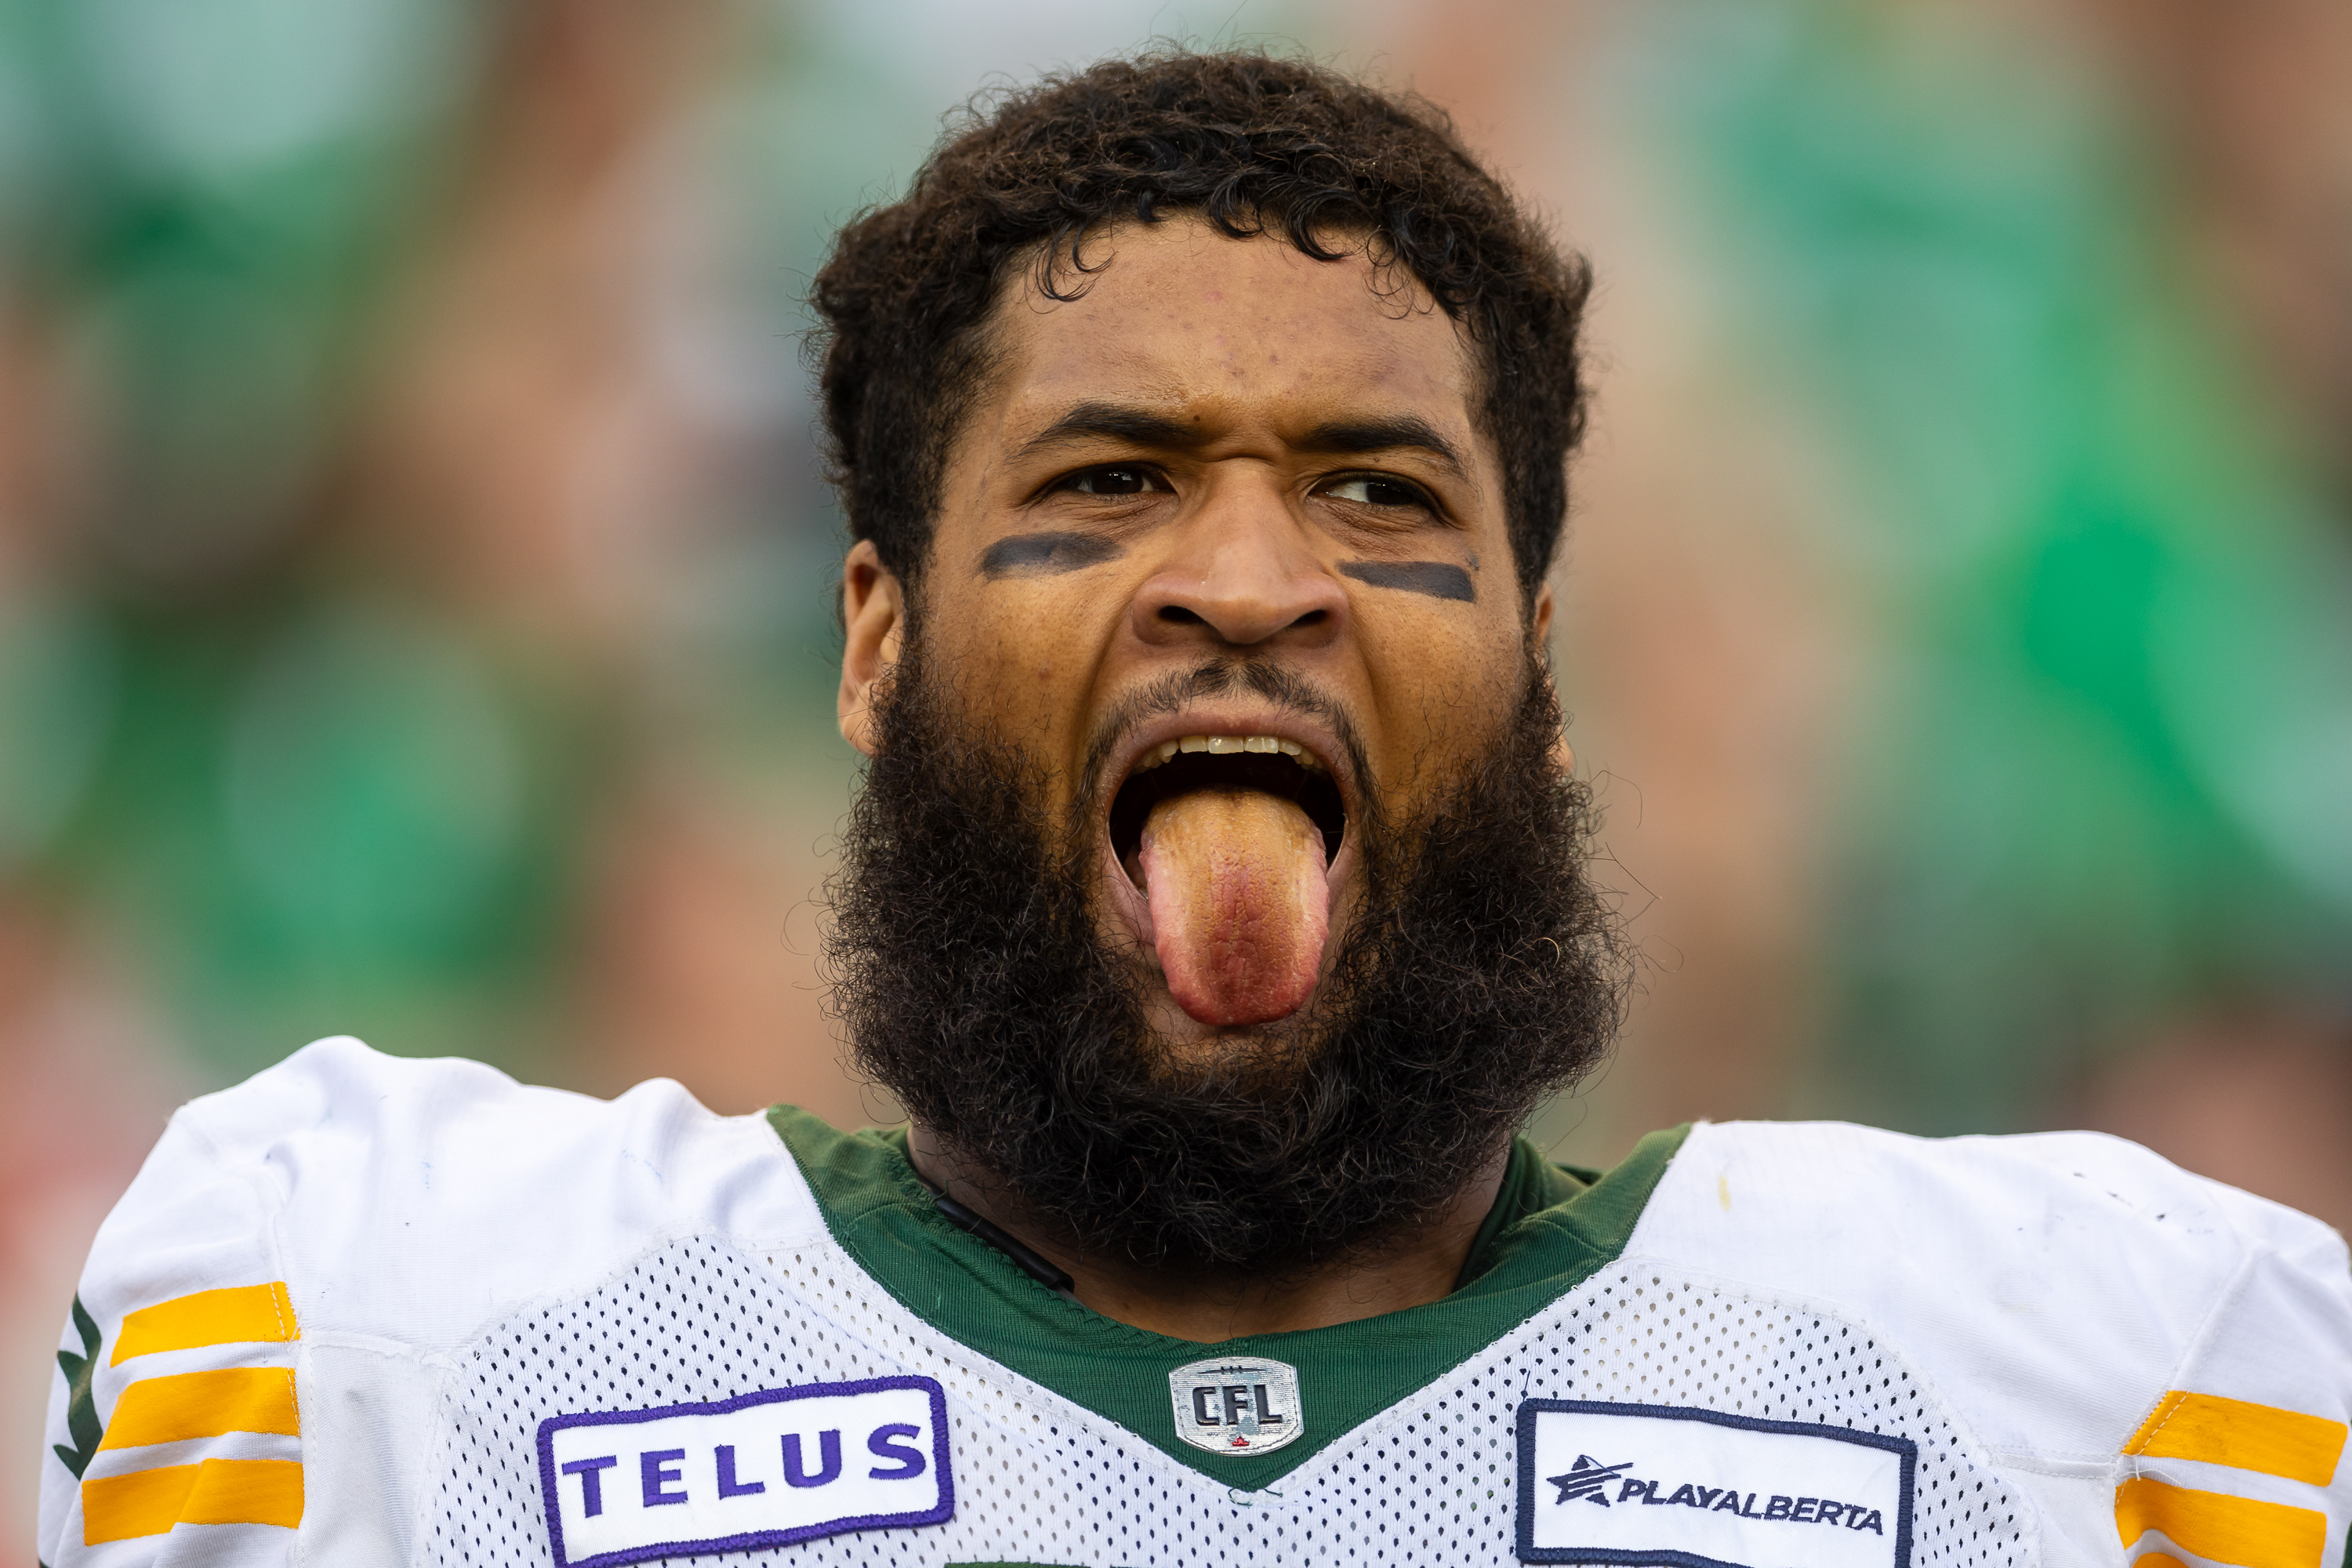 REGINA, CANADA - JULY 6: Tomas Jack-Kurdyla #64 of the Edmonton Elks on the sideline before the game between the Edmonton Elks and Saskatchewan Roughriders at Mosaic Stadium on July 6, 2023 in Regina, Canada. (Photo by Brent Just/Getty Images)